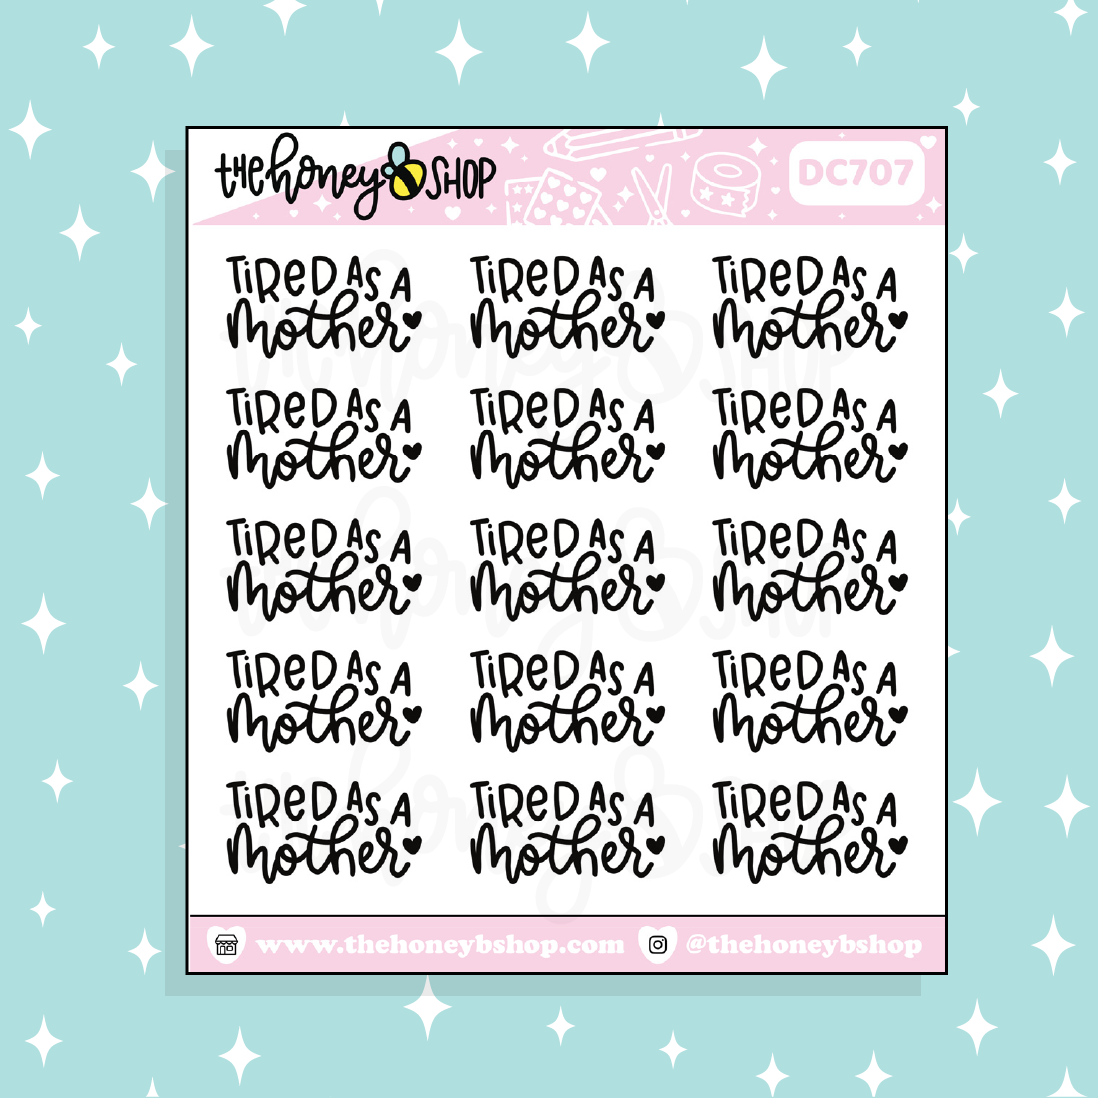 Tired As A Mother Lettering Doodle Sticker